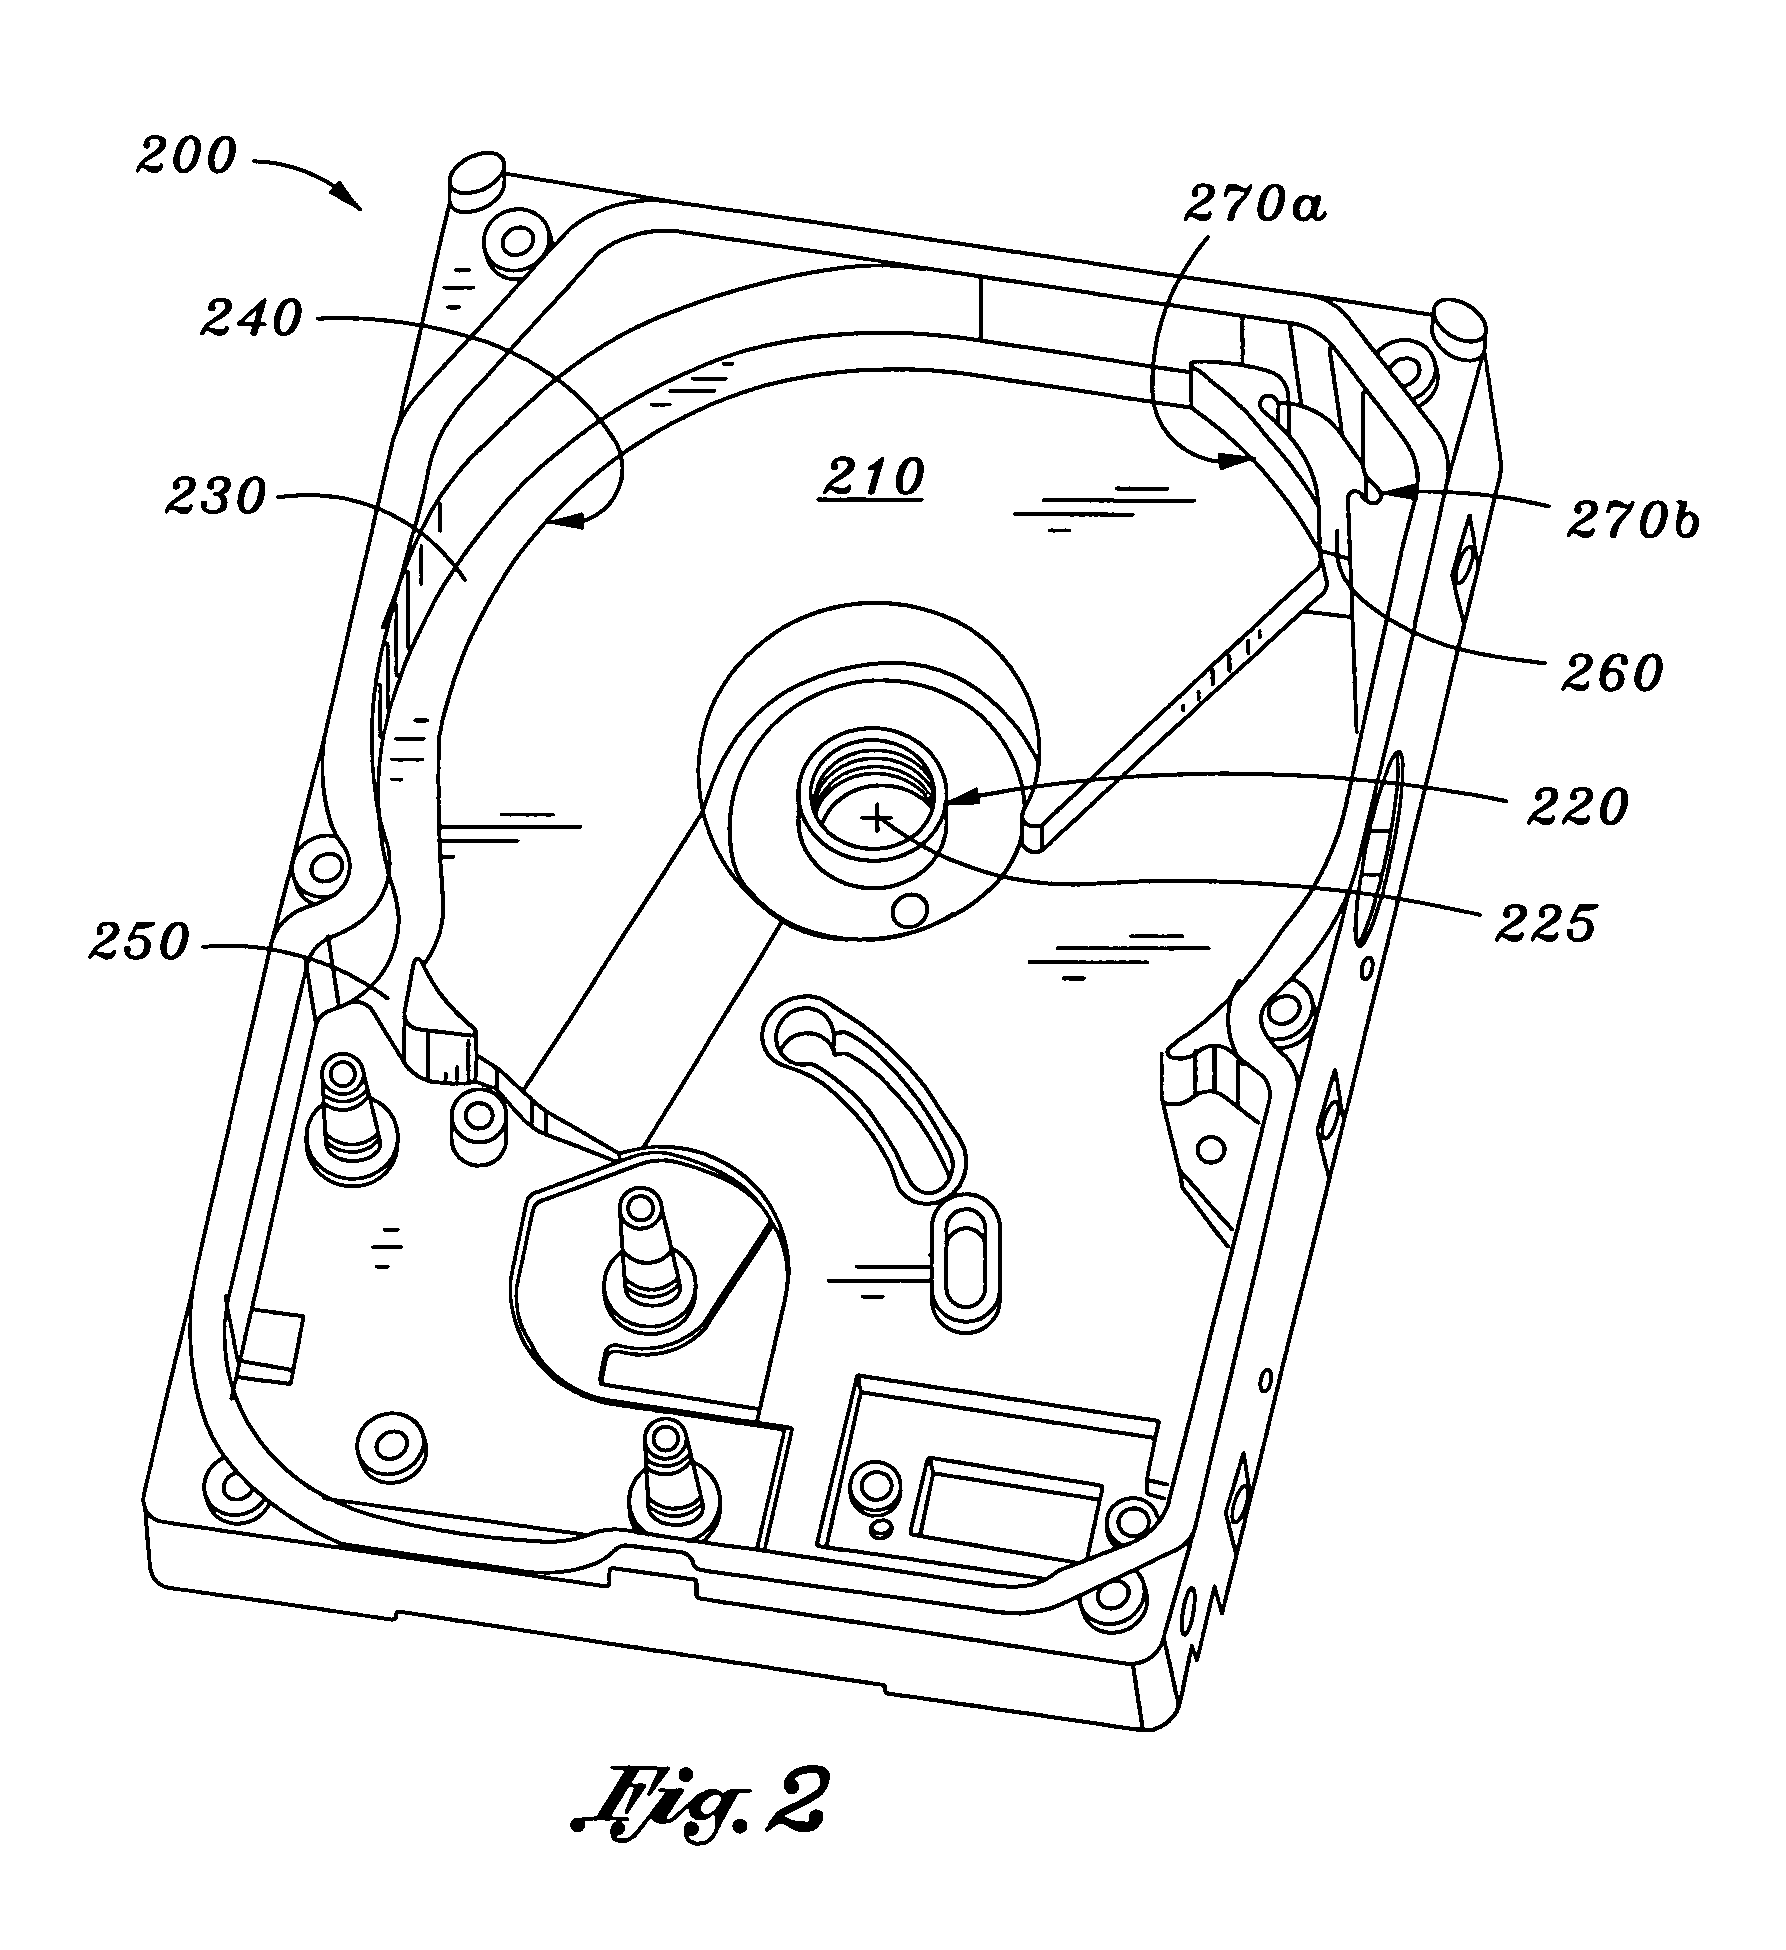 Disk drive with air channel